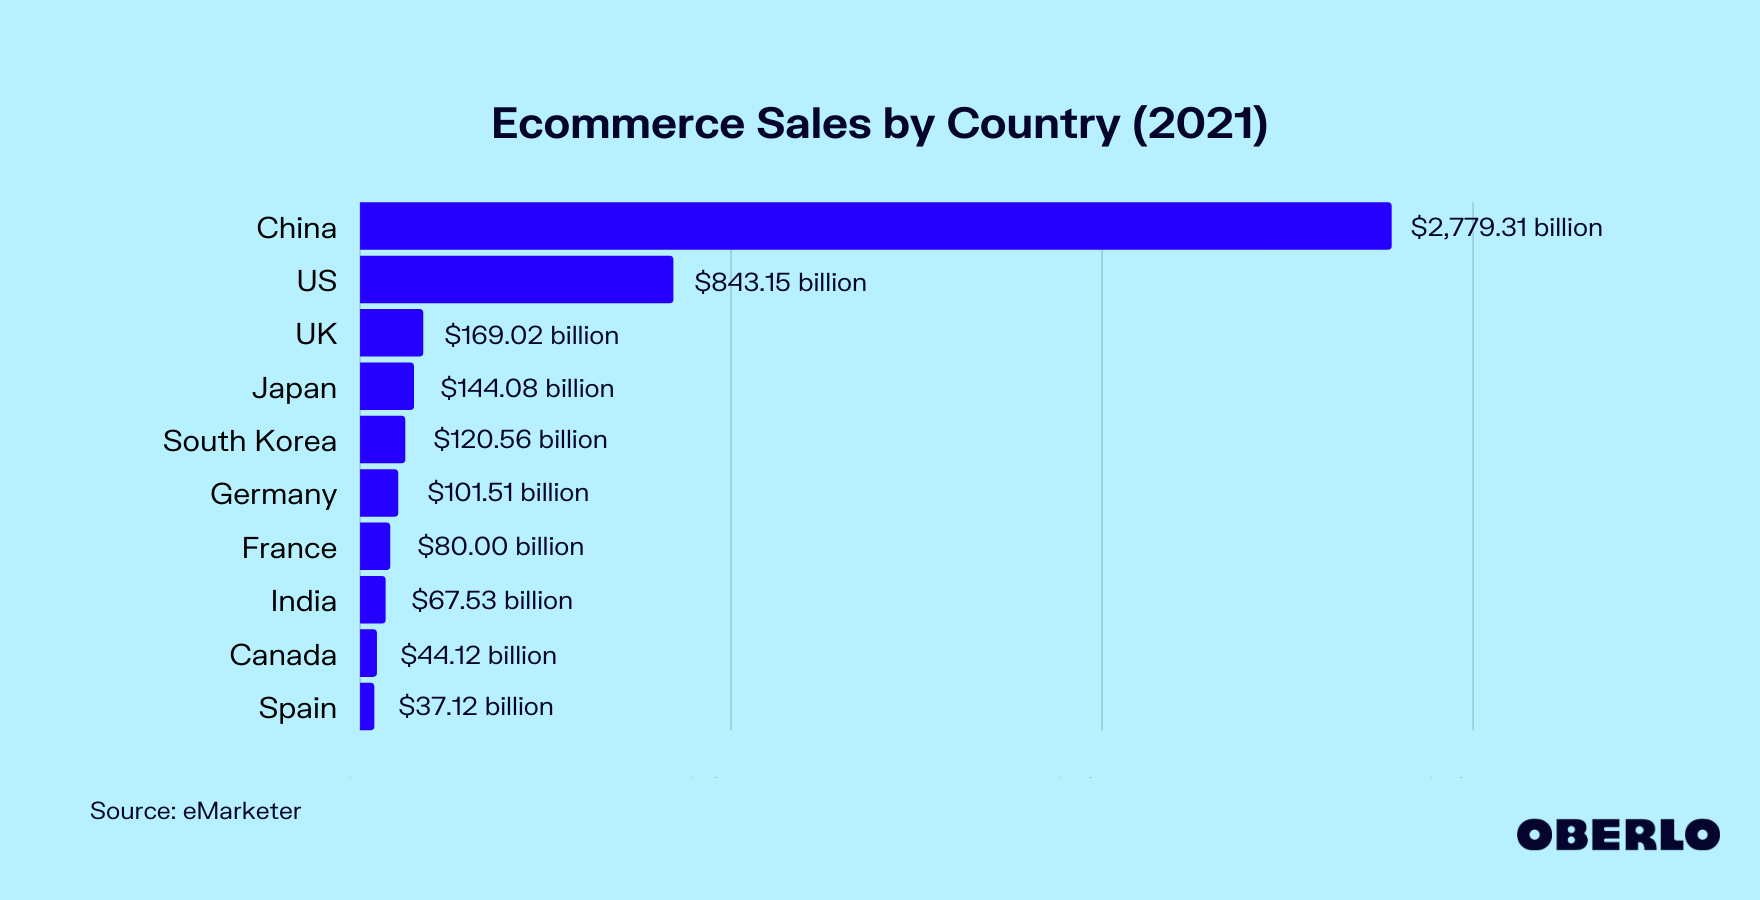 Image: a graph showing the top 10 countries in terms of ecommerce sales